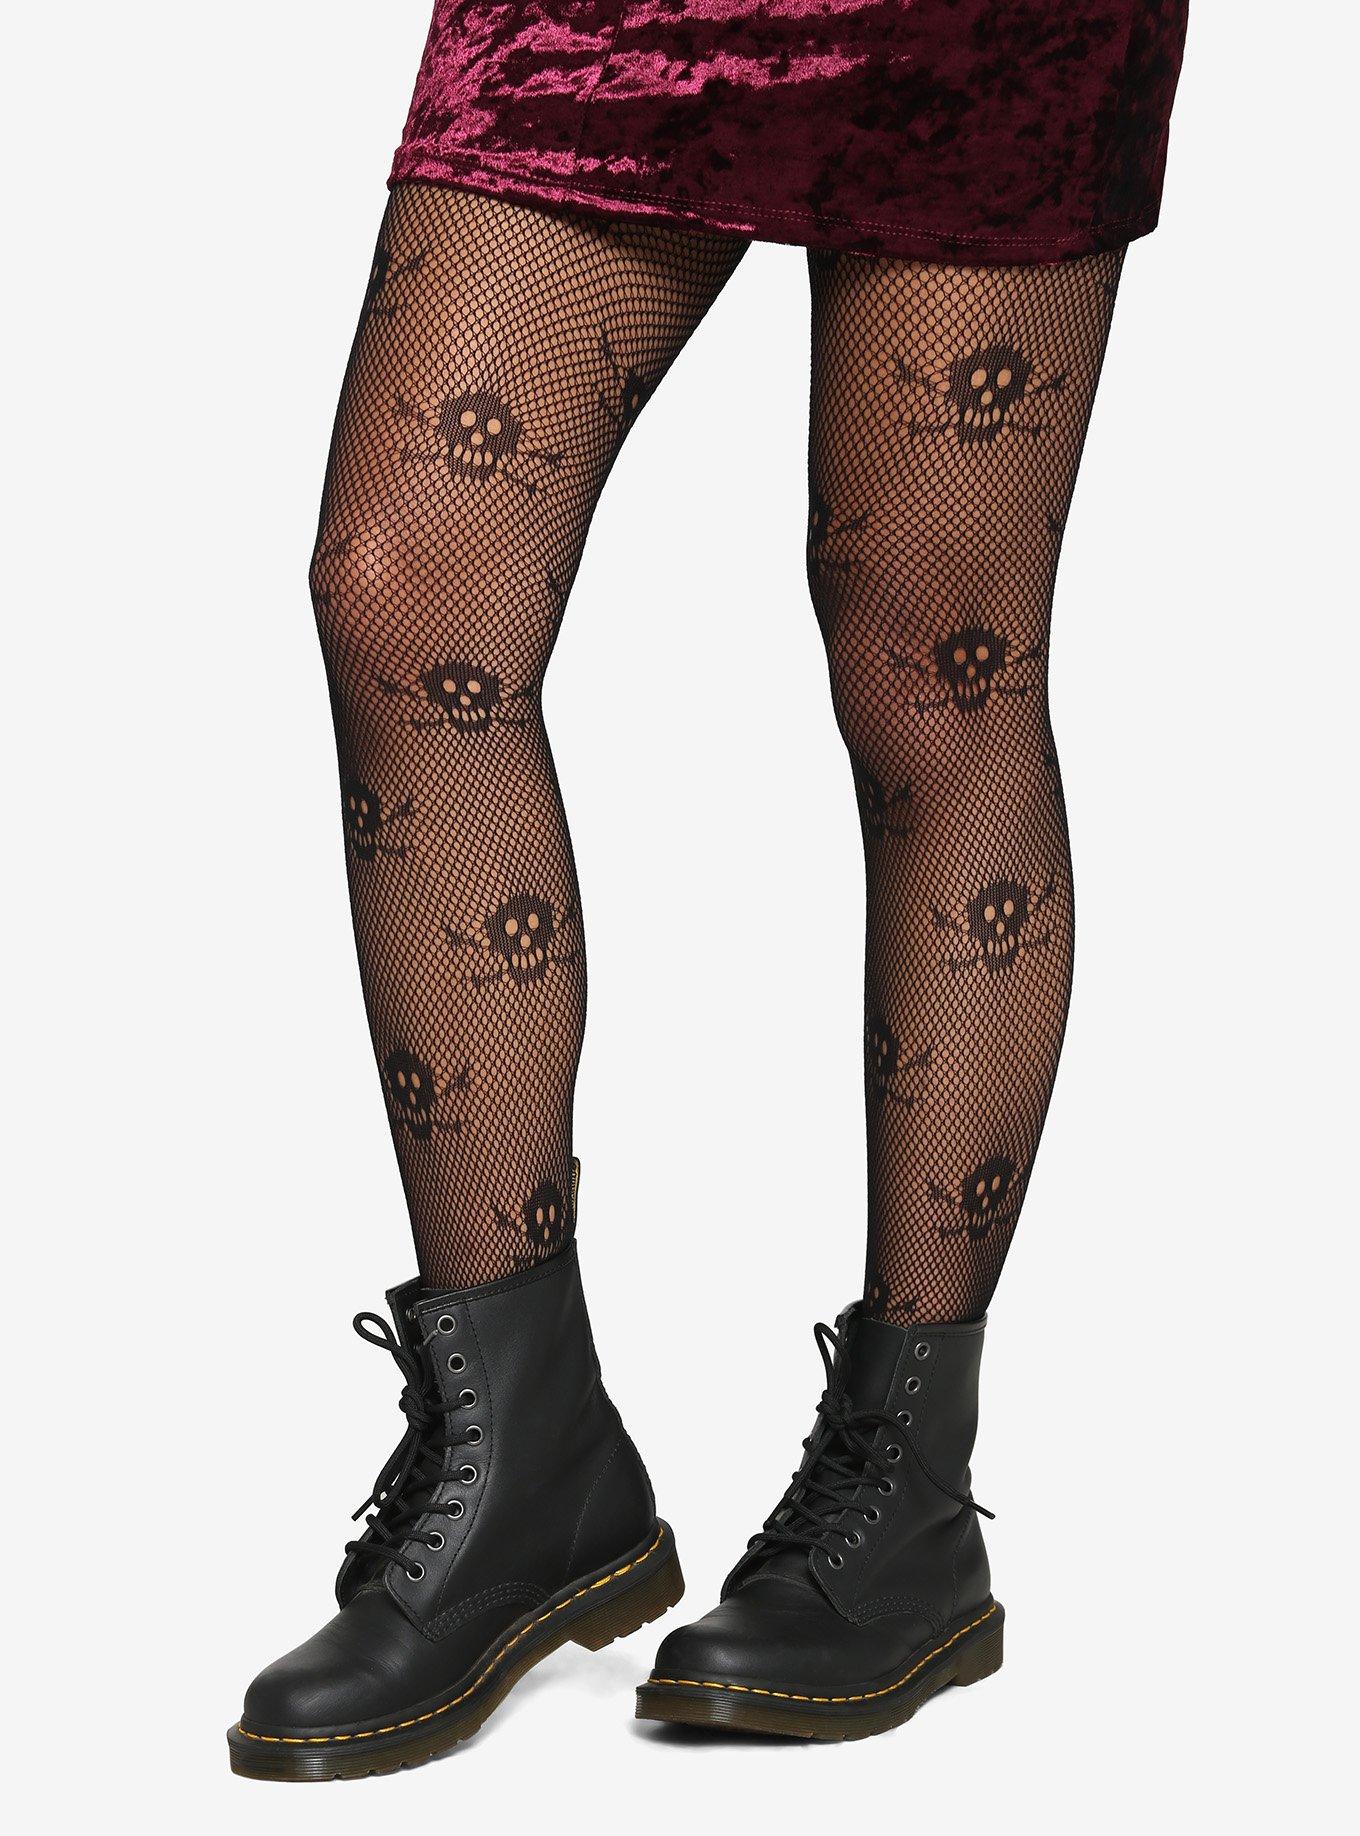 wsevypo Women Fishnet Stockings Sexy Lingeire Skull Print Tights Pantyhose  for Halloween 